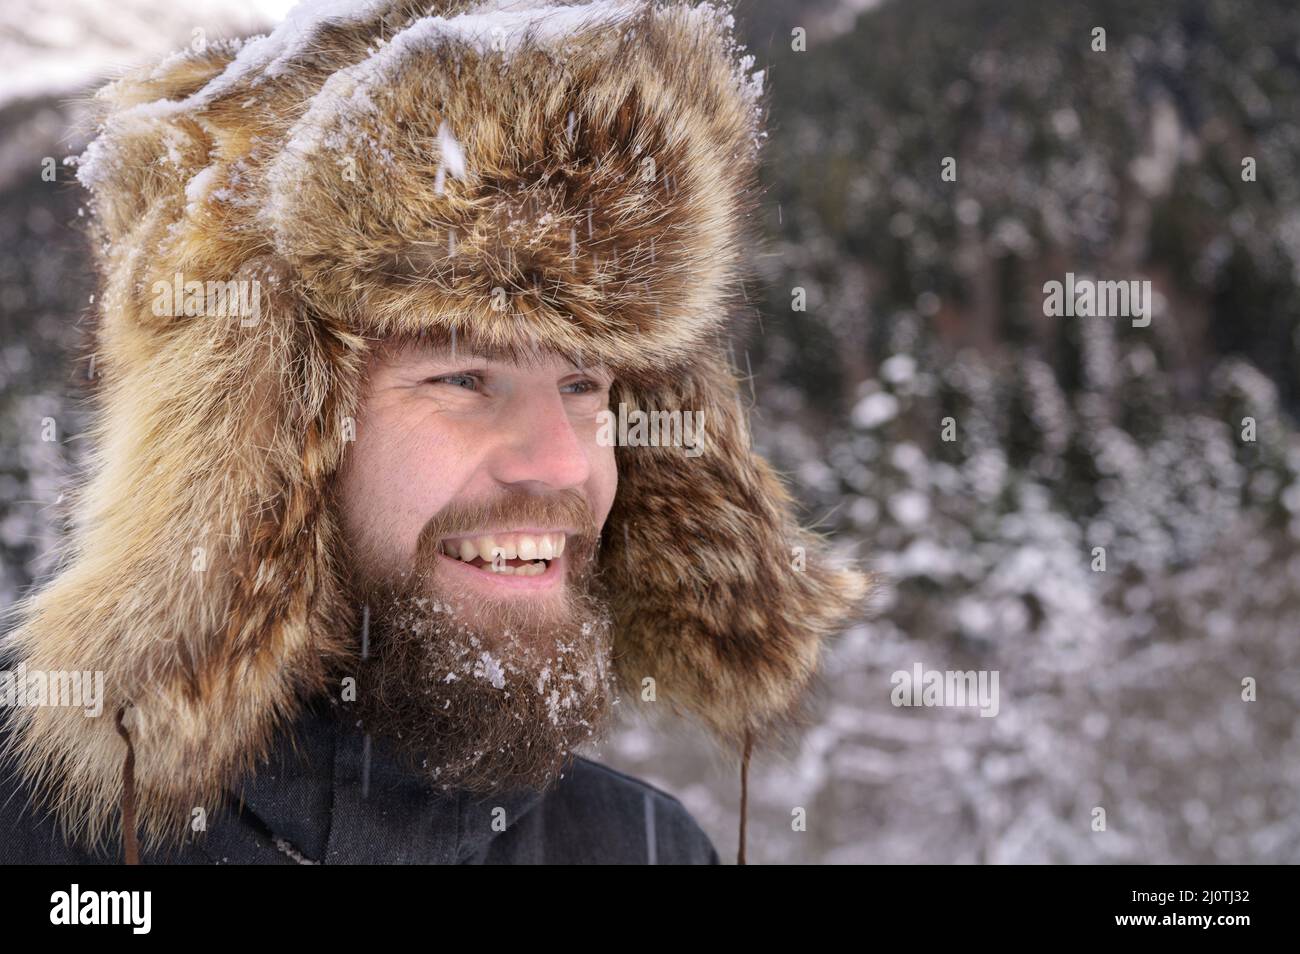 Man in a fur winter hat with ears smiling portrait on a background of a winter forest Stock Photo